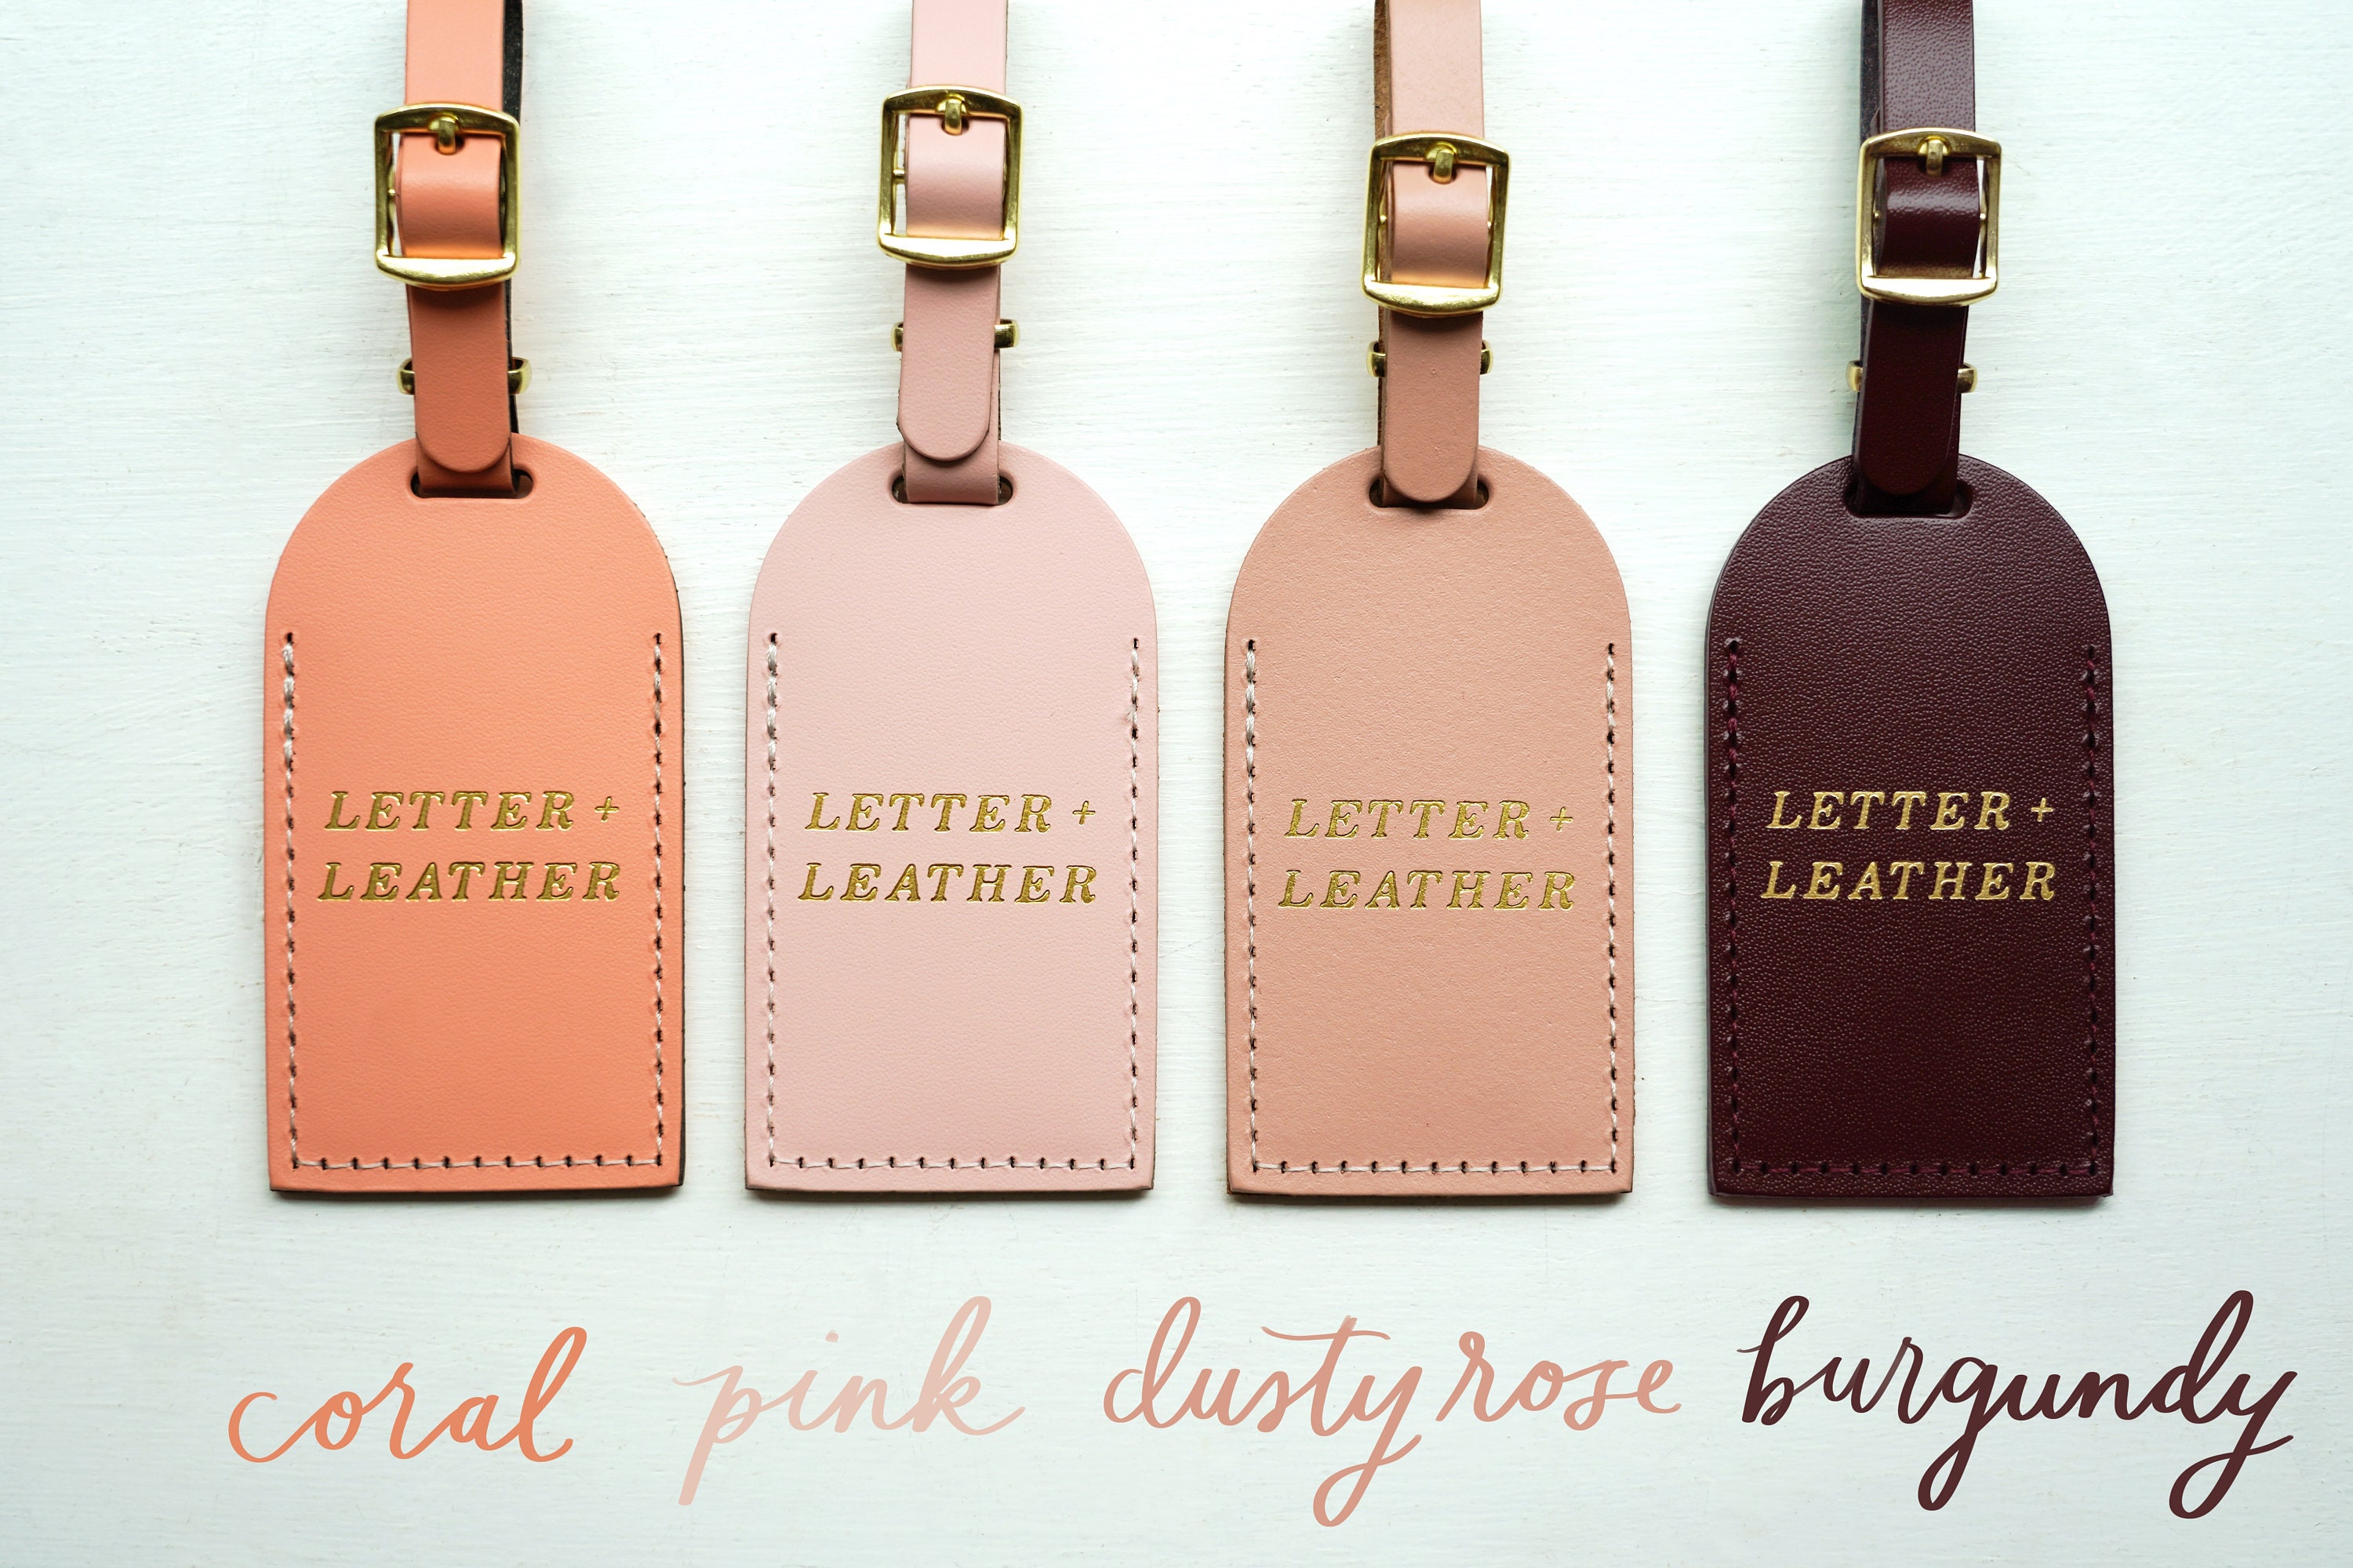 Sweetude 48 Sets Leather Luggage Tags Wedding Favors for Guests Bulk The  Adventure Begins Luggage Tags with Name Card for Bridesmaid Gifts Weddings